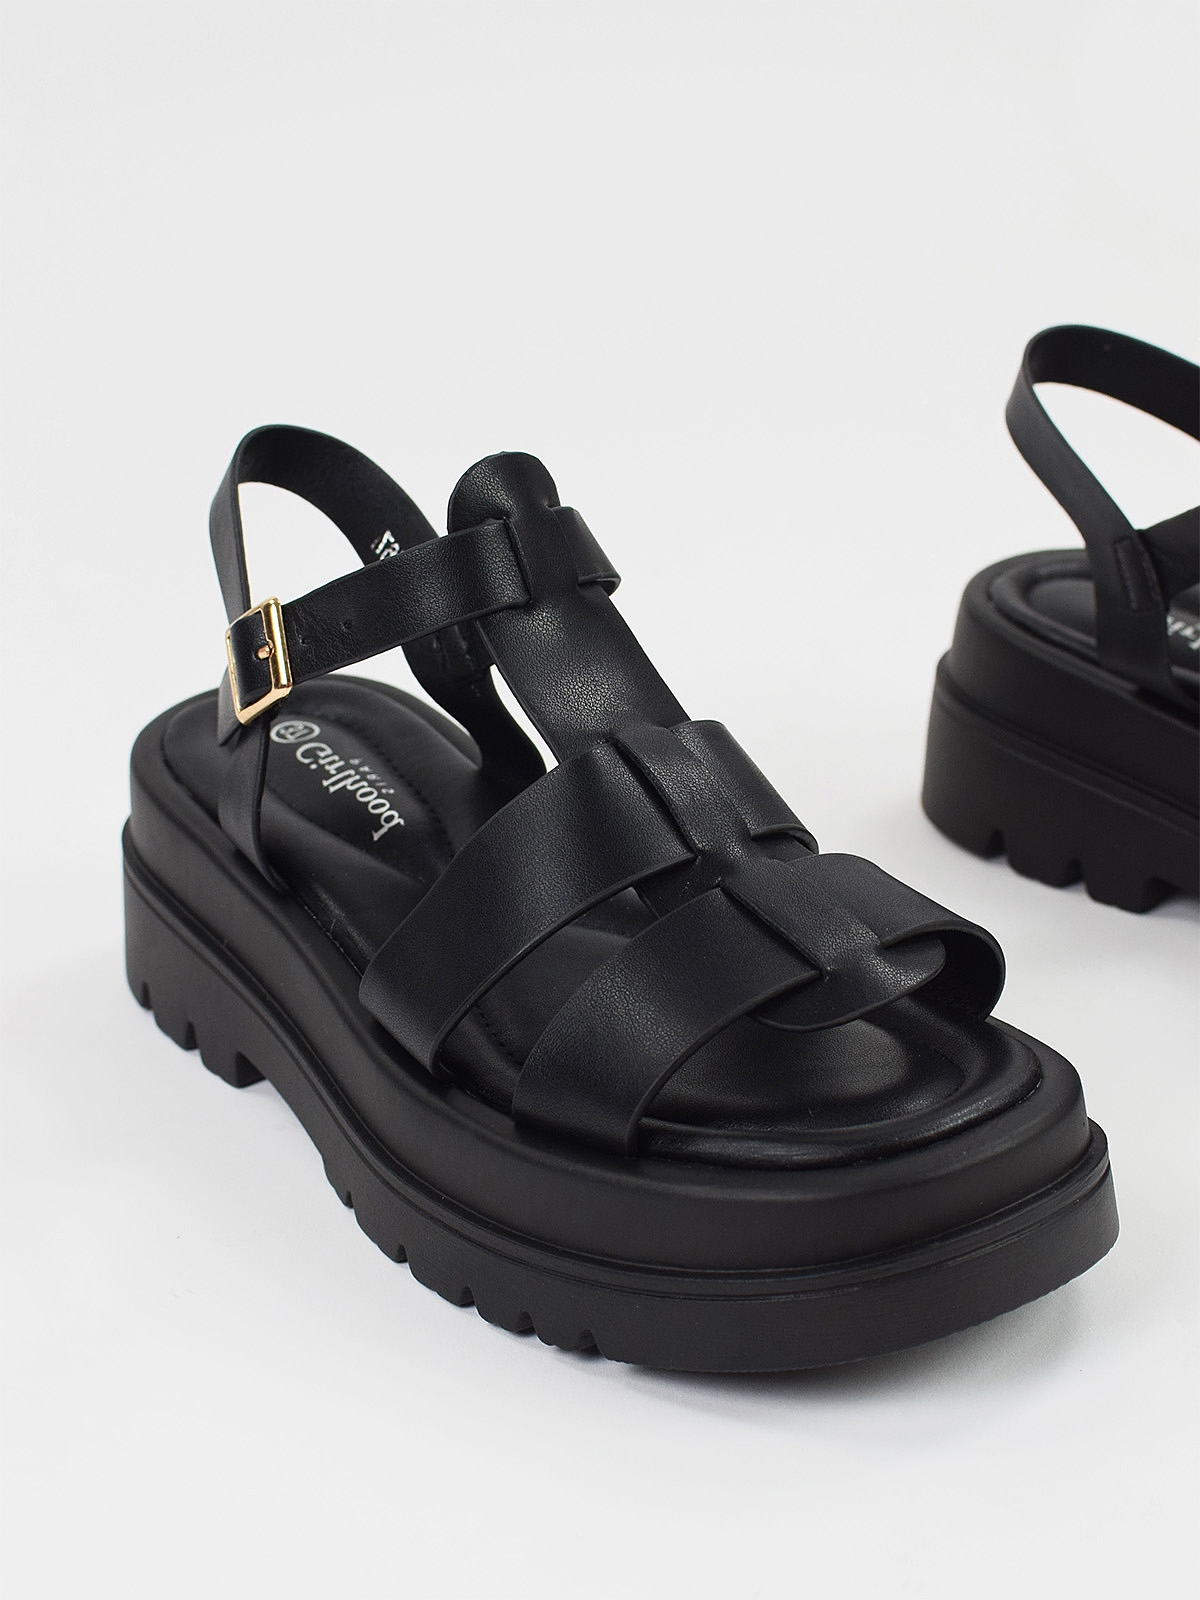 Chunky flat sandals with adjustable straps in black